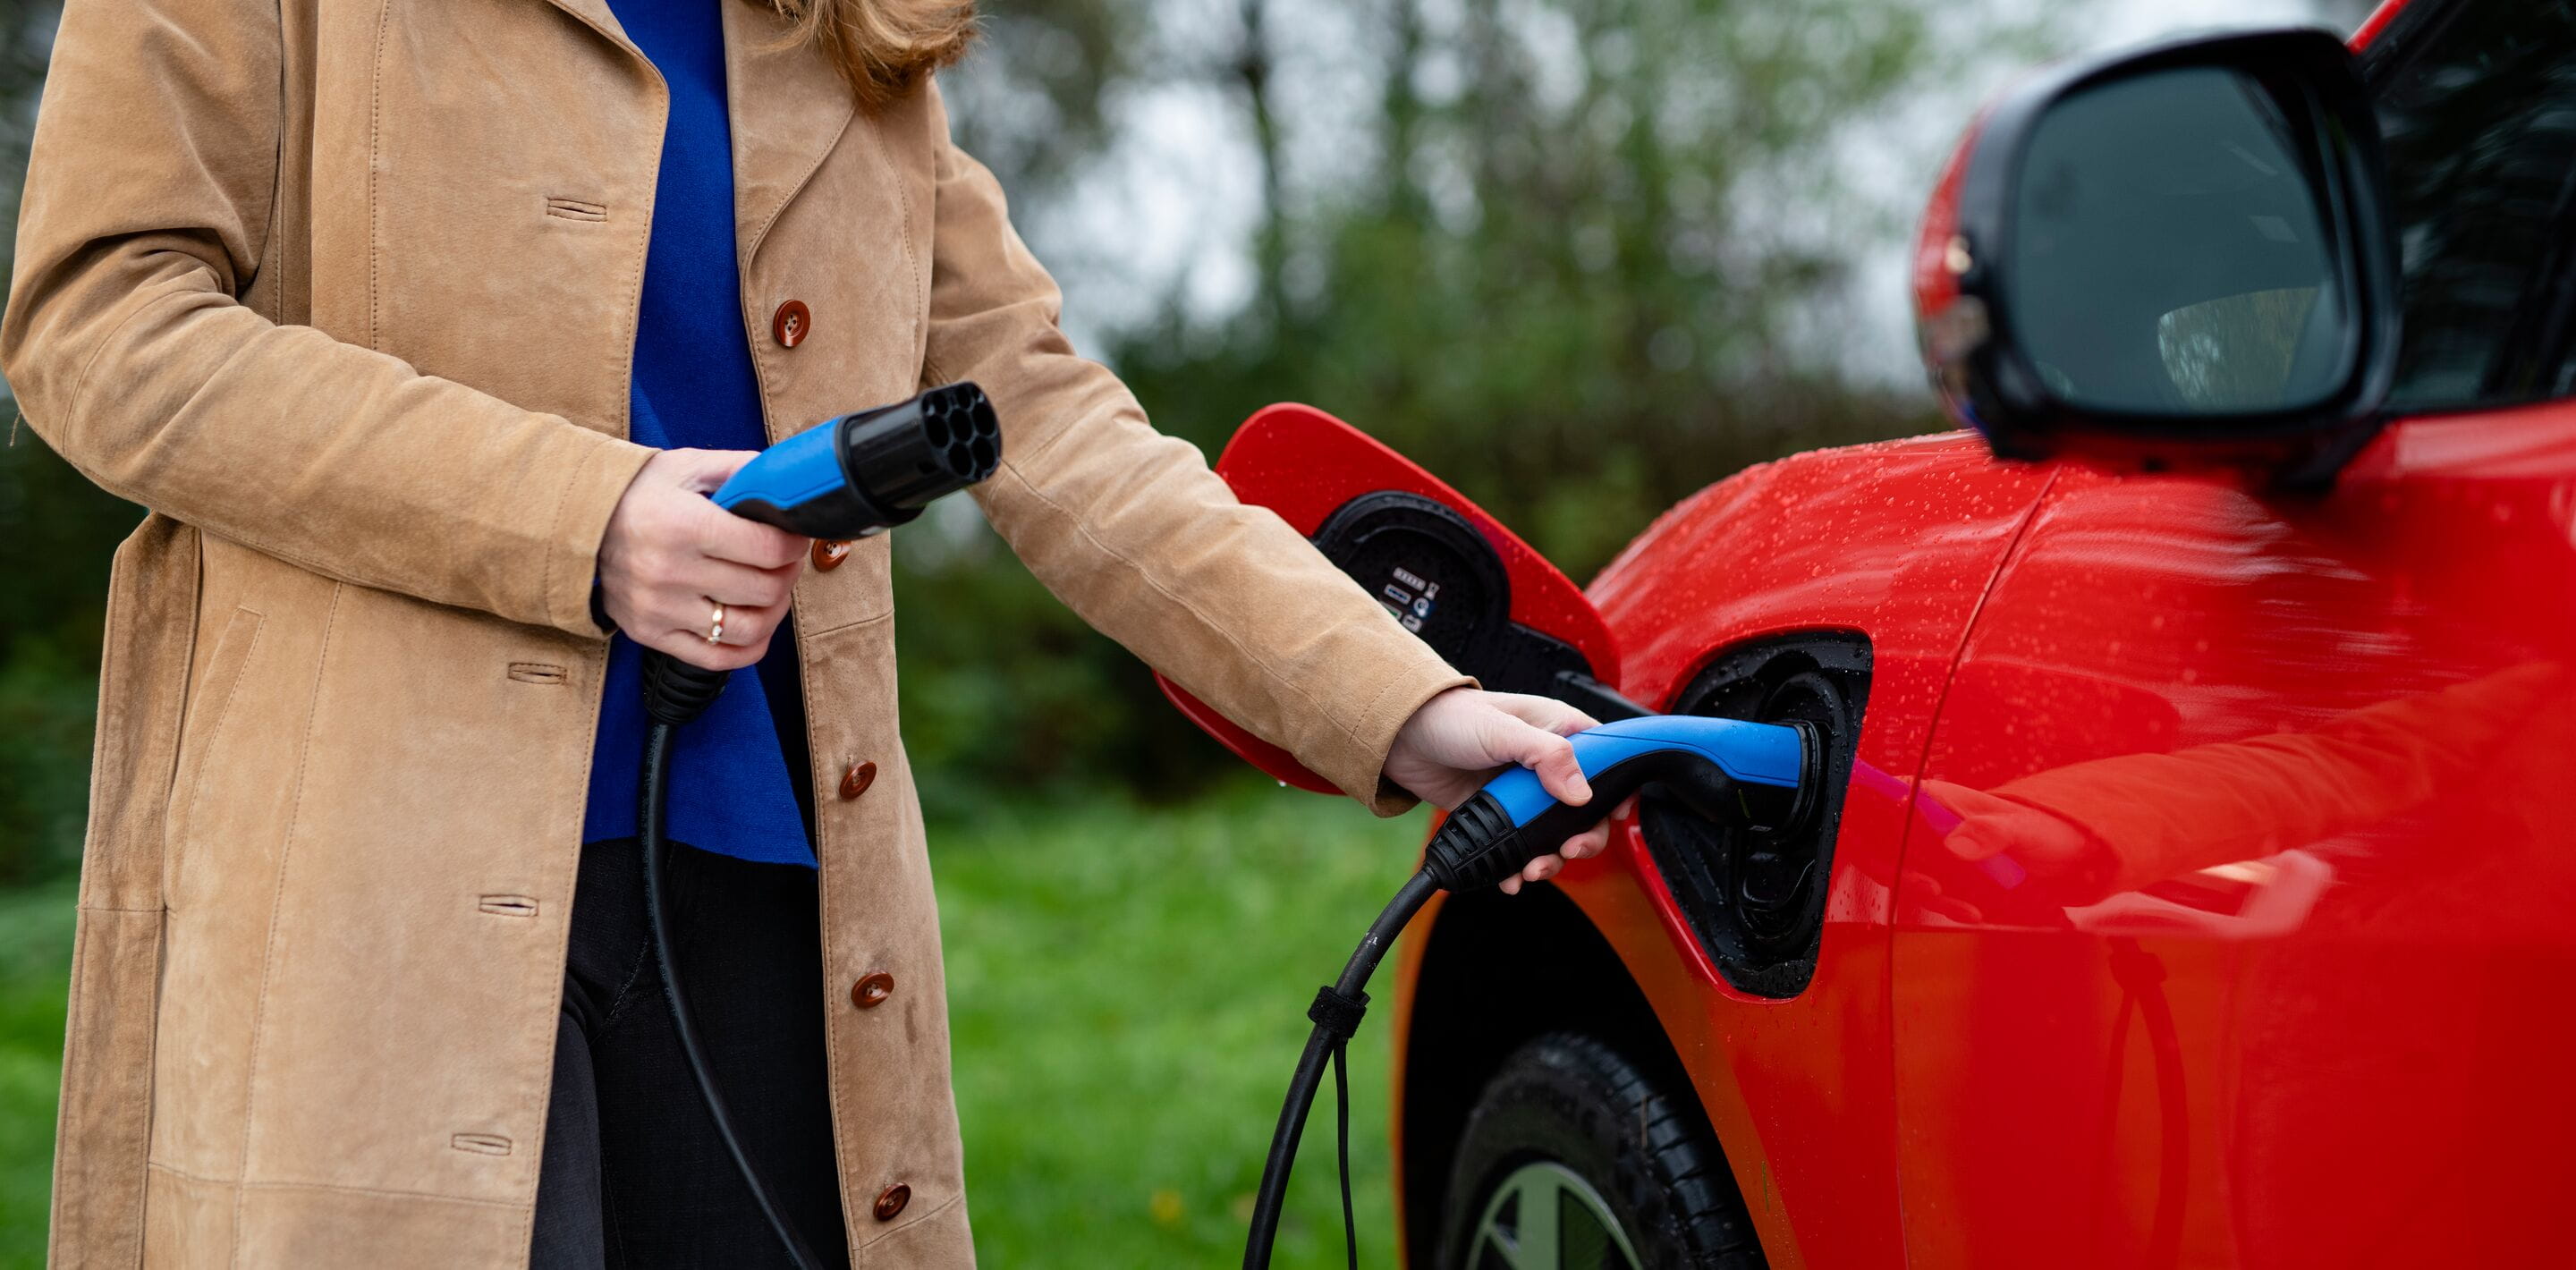 Woman charging electric vehicle